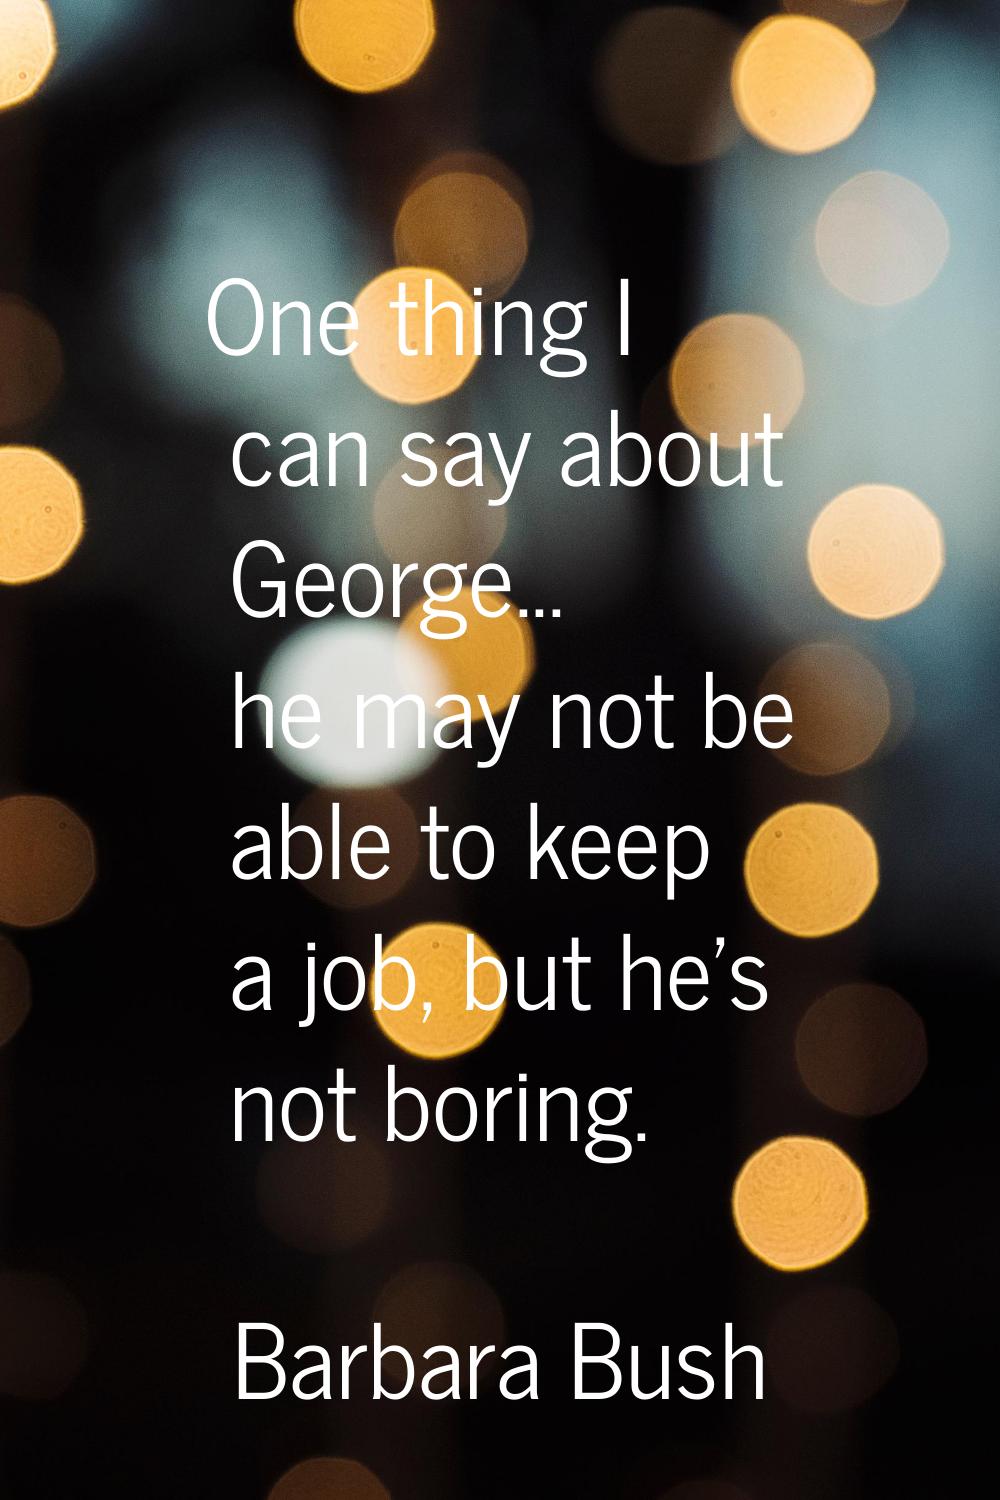 One thing I can say about George... he may not be able to keep a job, but he's not boring.